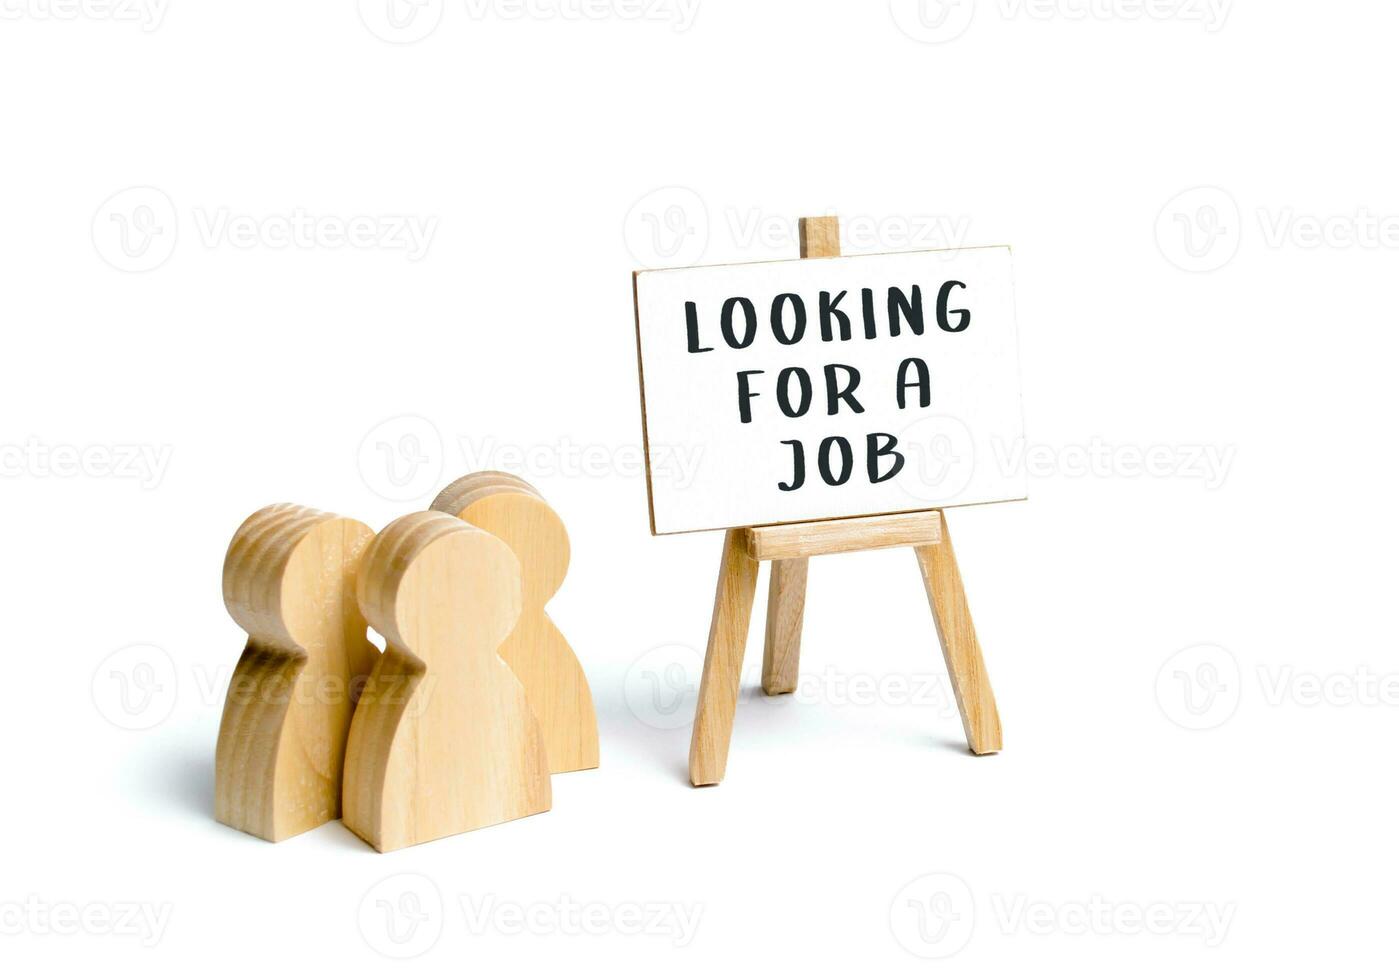 Accepts the job and join the team. Finding a better place. Search and recruitment of new employees for work. Hire staff. Employment Agency. Recruiting, staffing. Change of workplace. photo